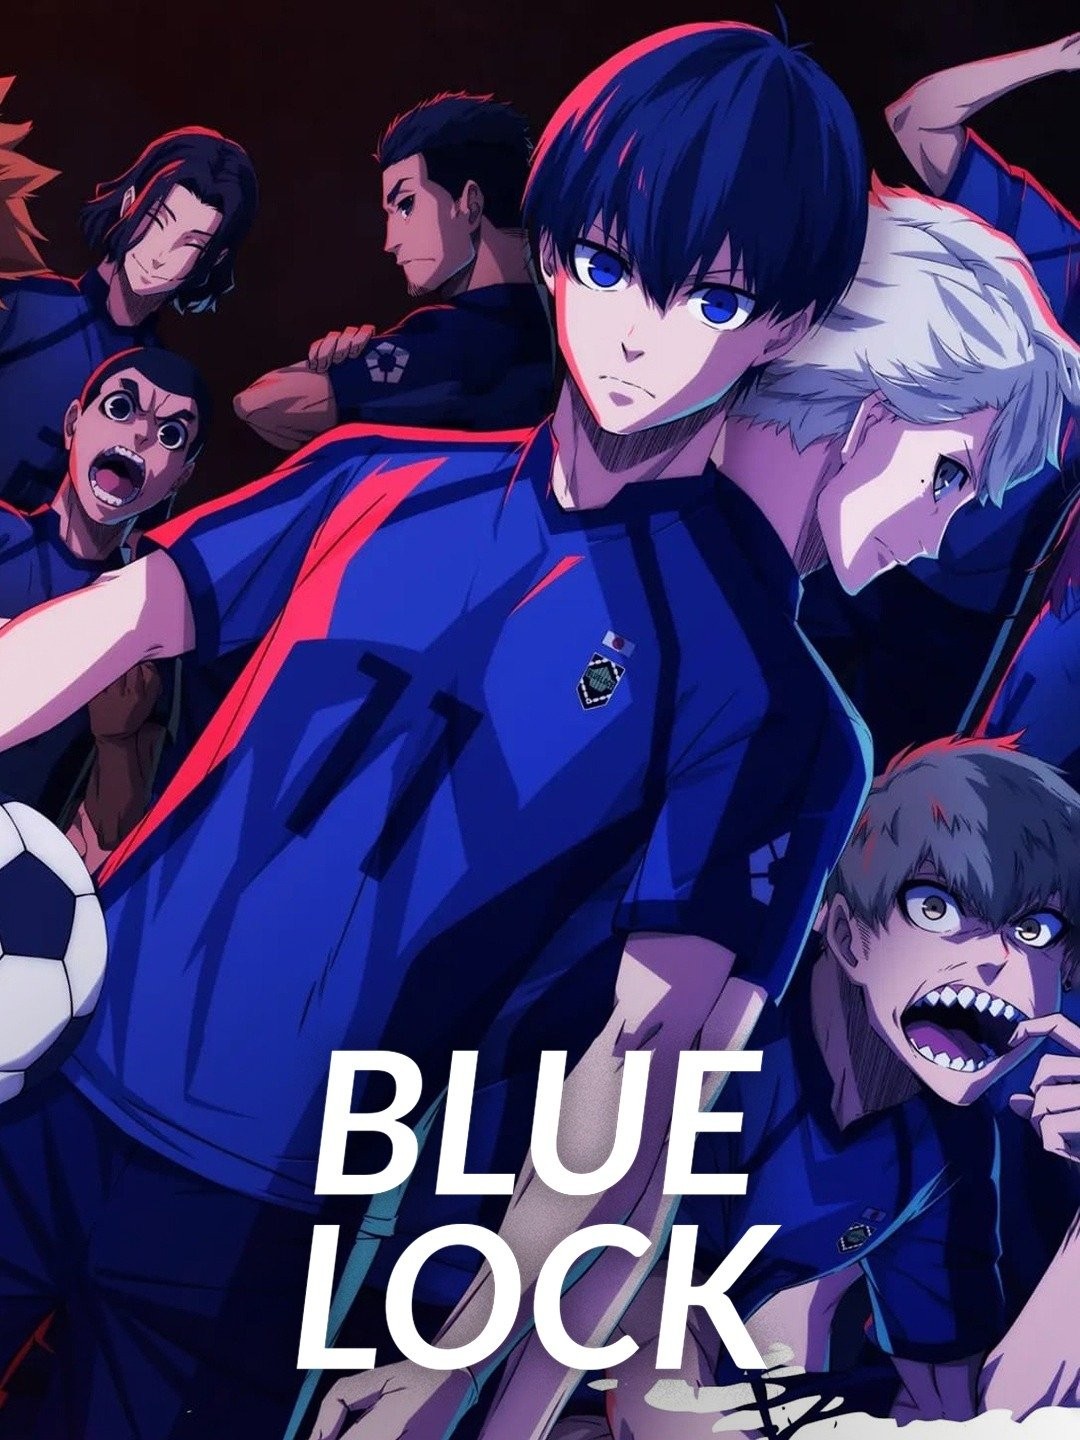 The 15 best football anime and manga in the world right now   SportsBriefcom